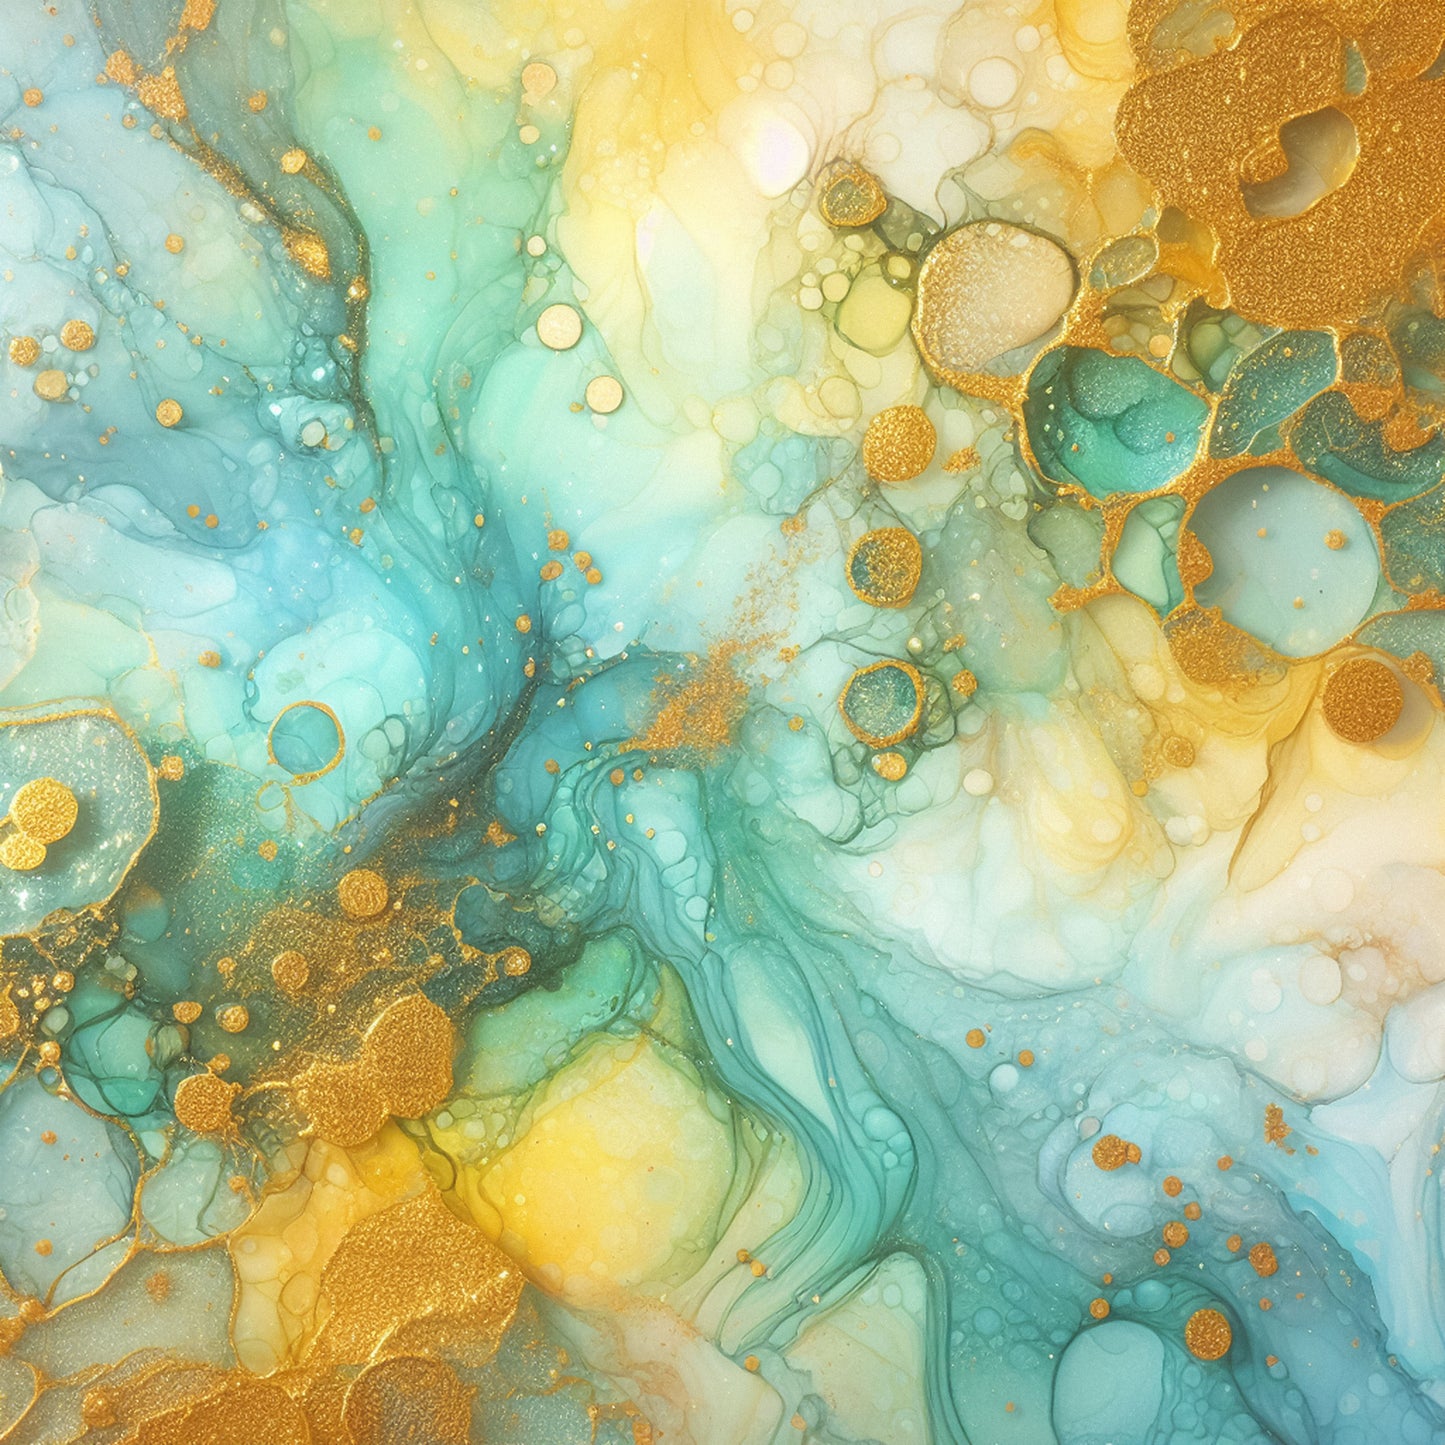 YELLOW AND AQUA ALCOHOL INK PATTERN VINYL - MULTIPLE VARIATIONS